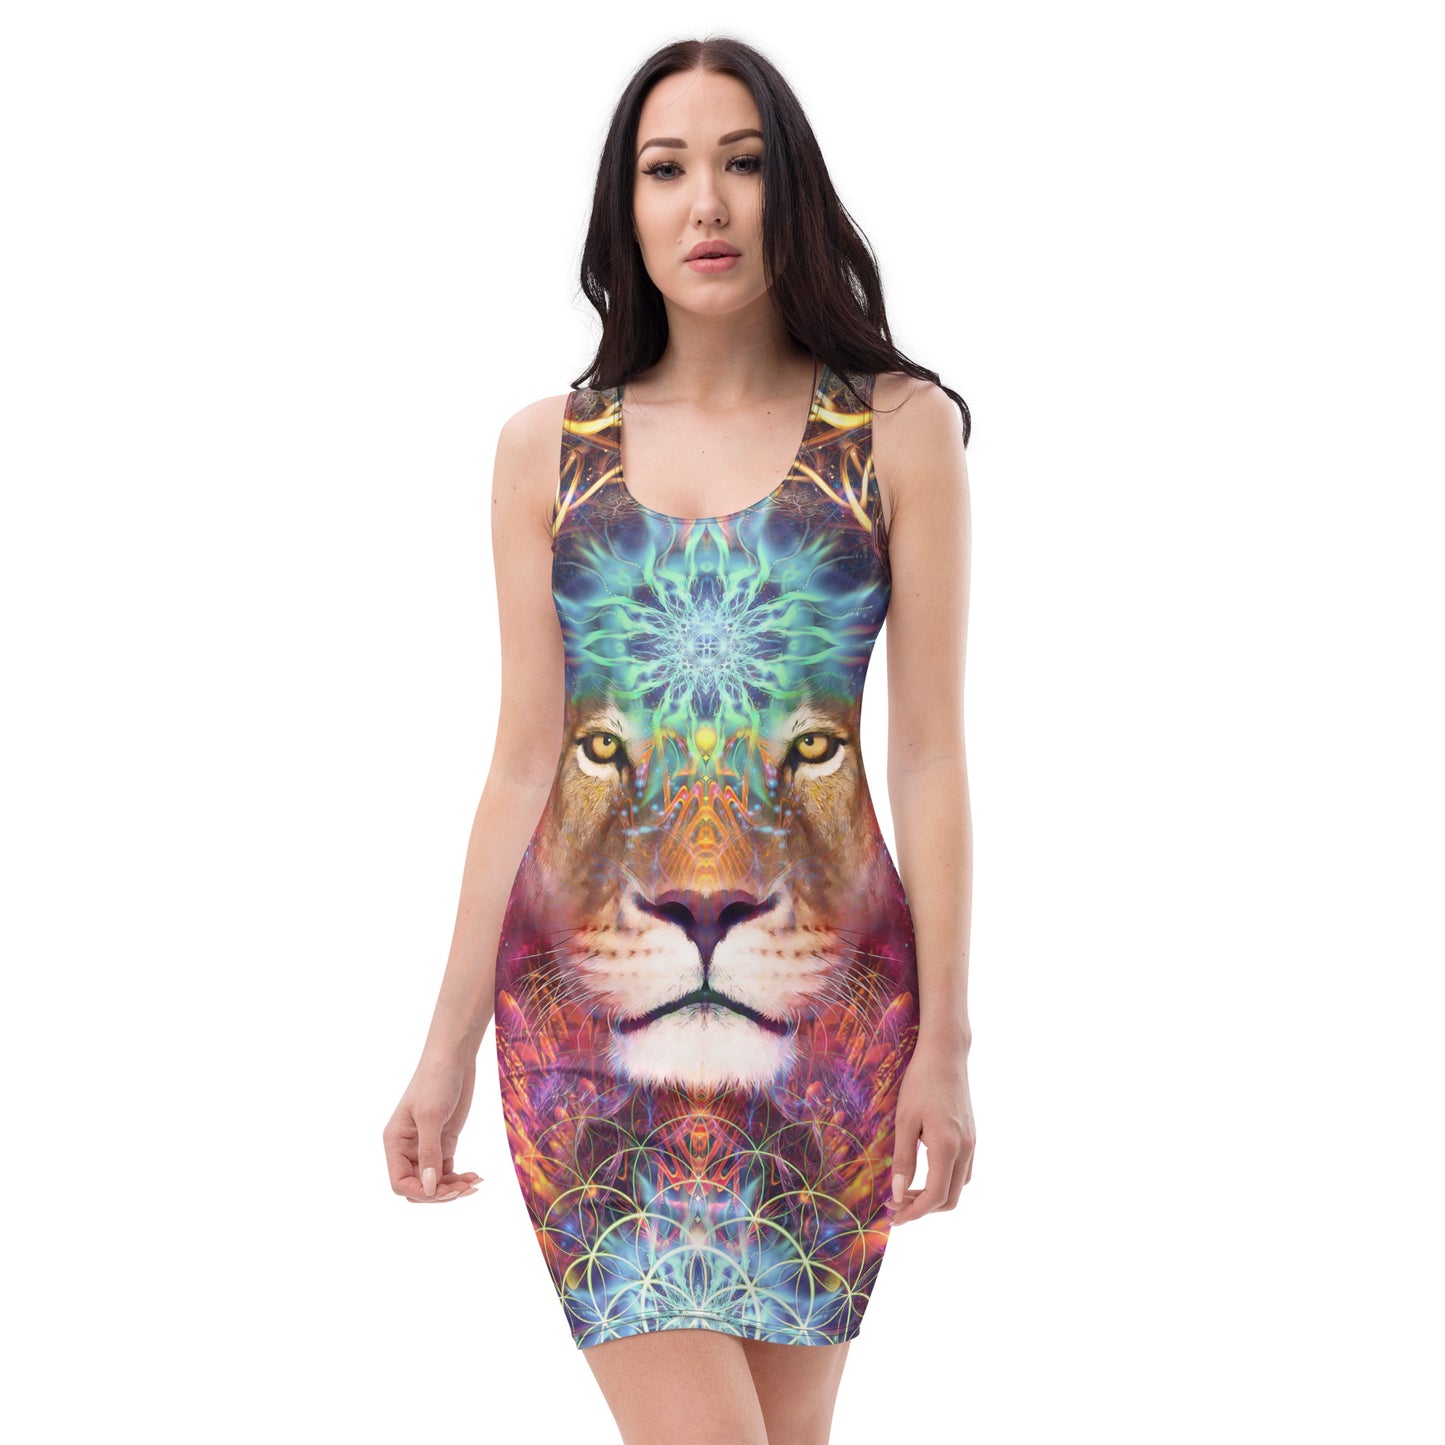 "Genesis" Bodycon FITTED DRESS